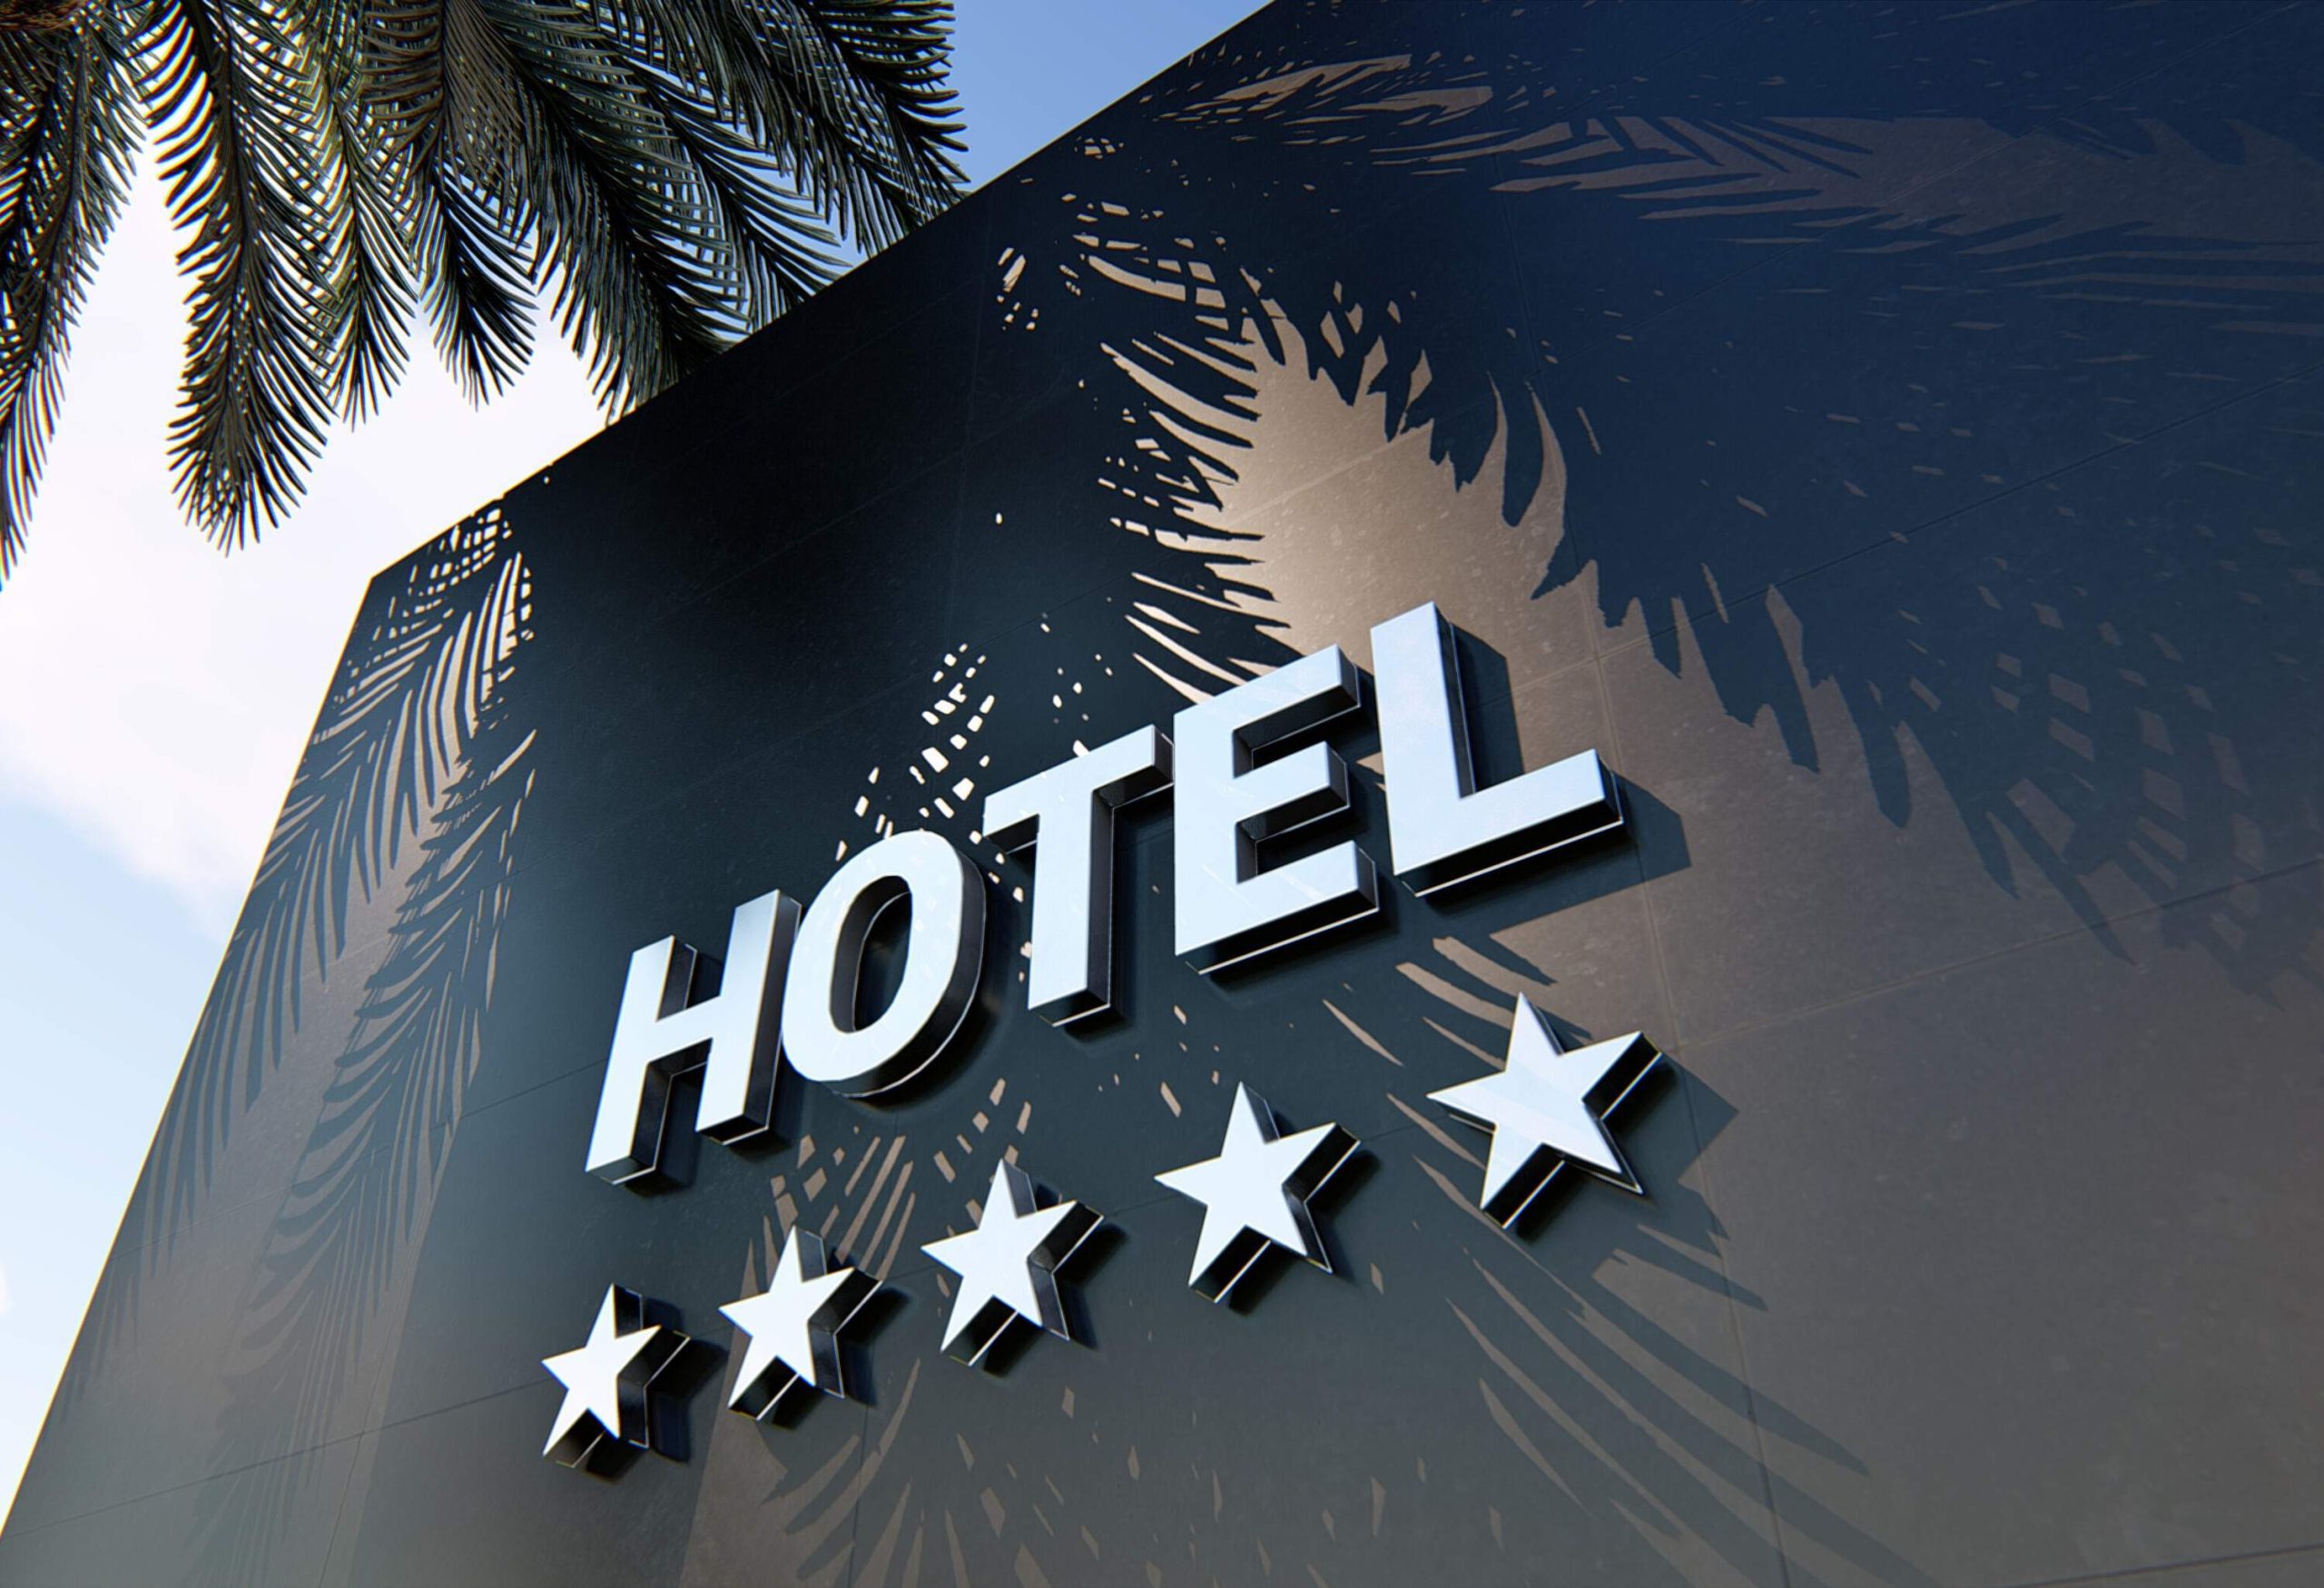 a black building facade with hotel written on it and showing five stars